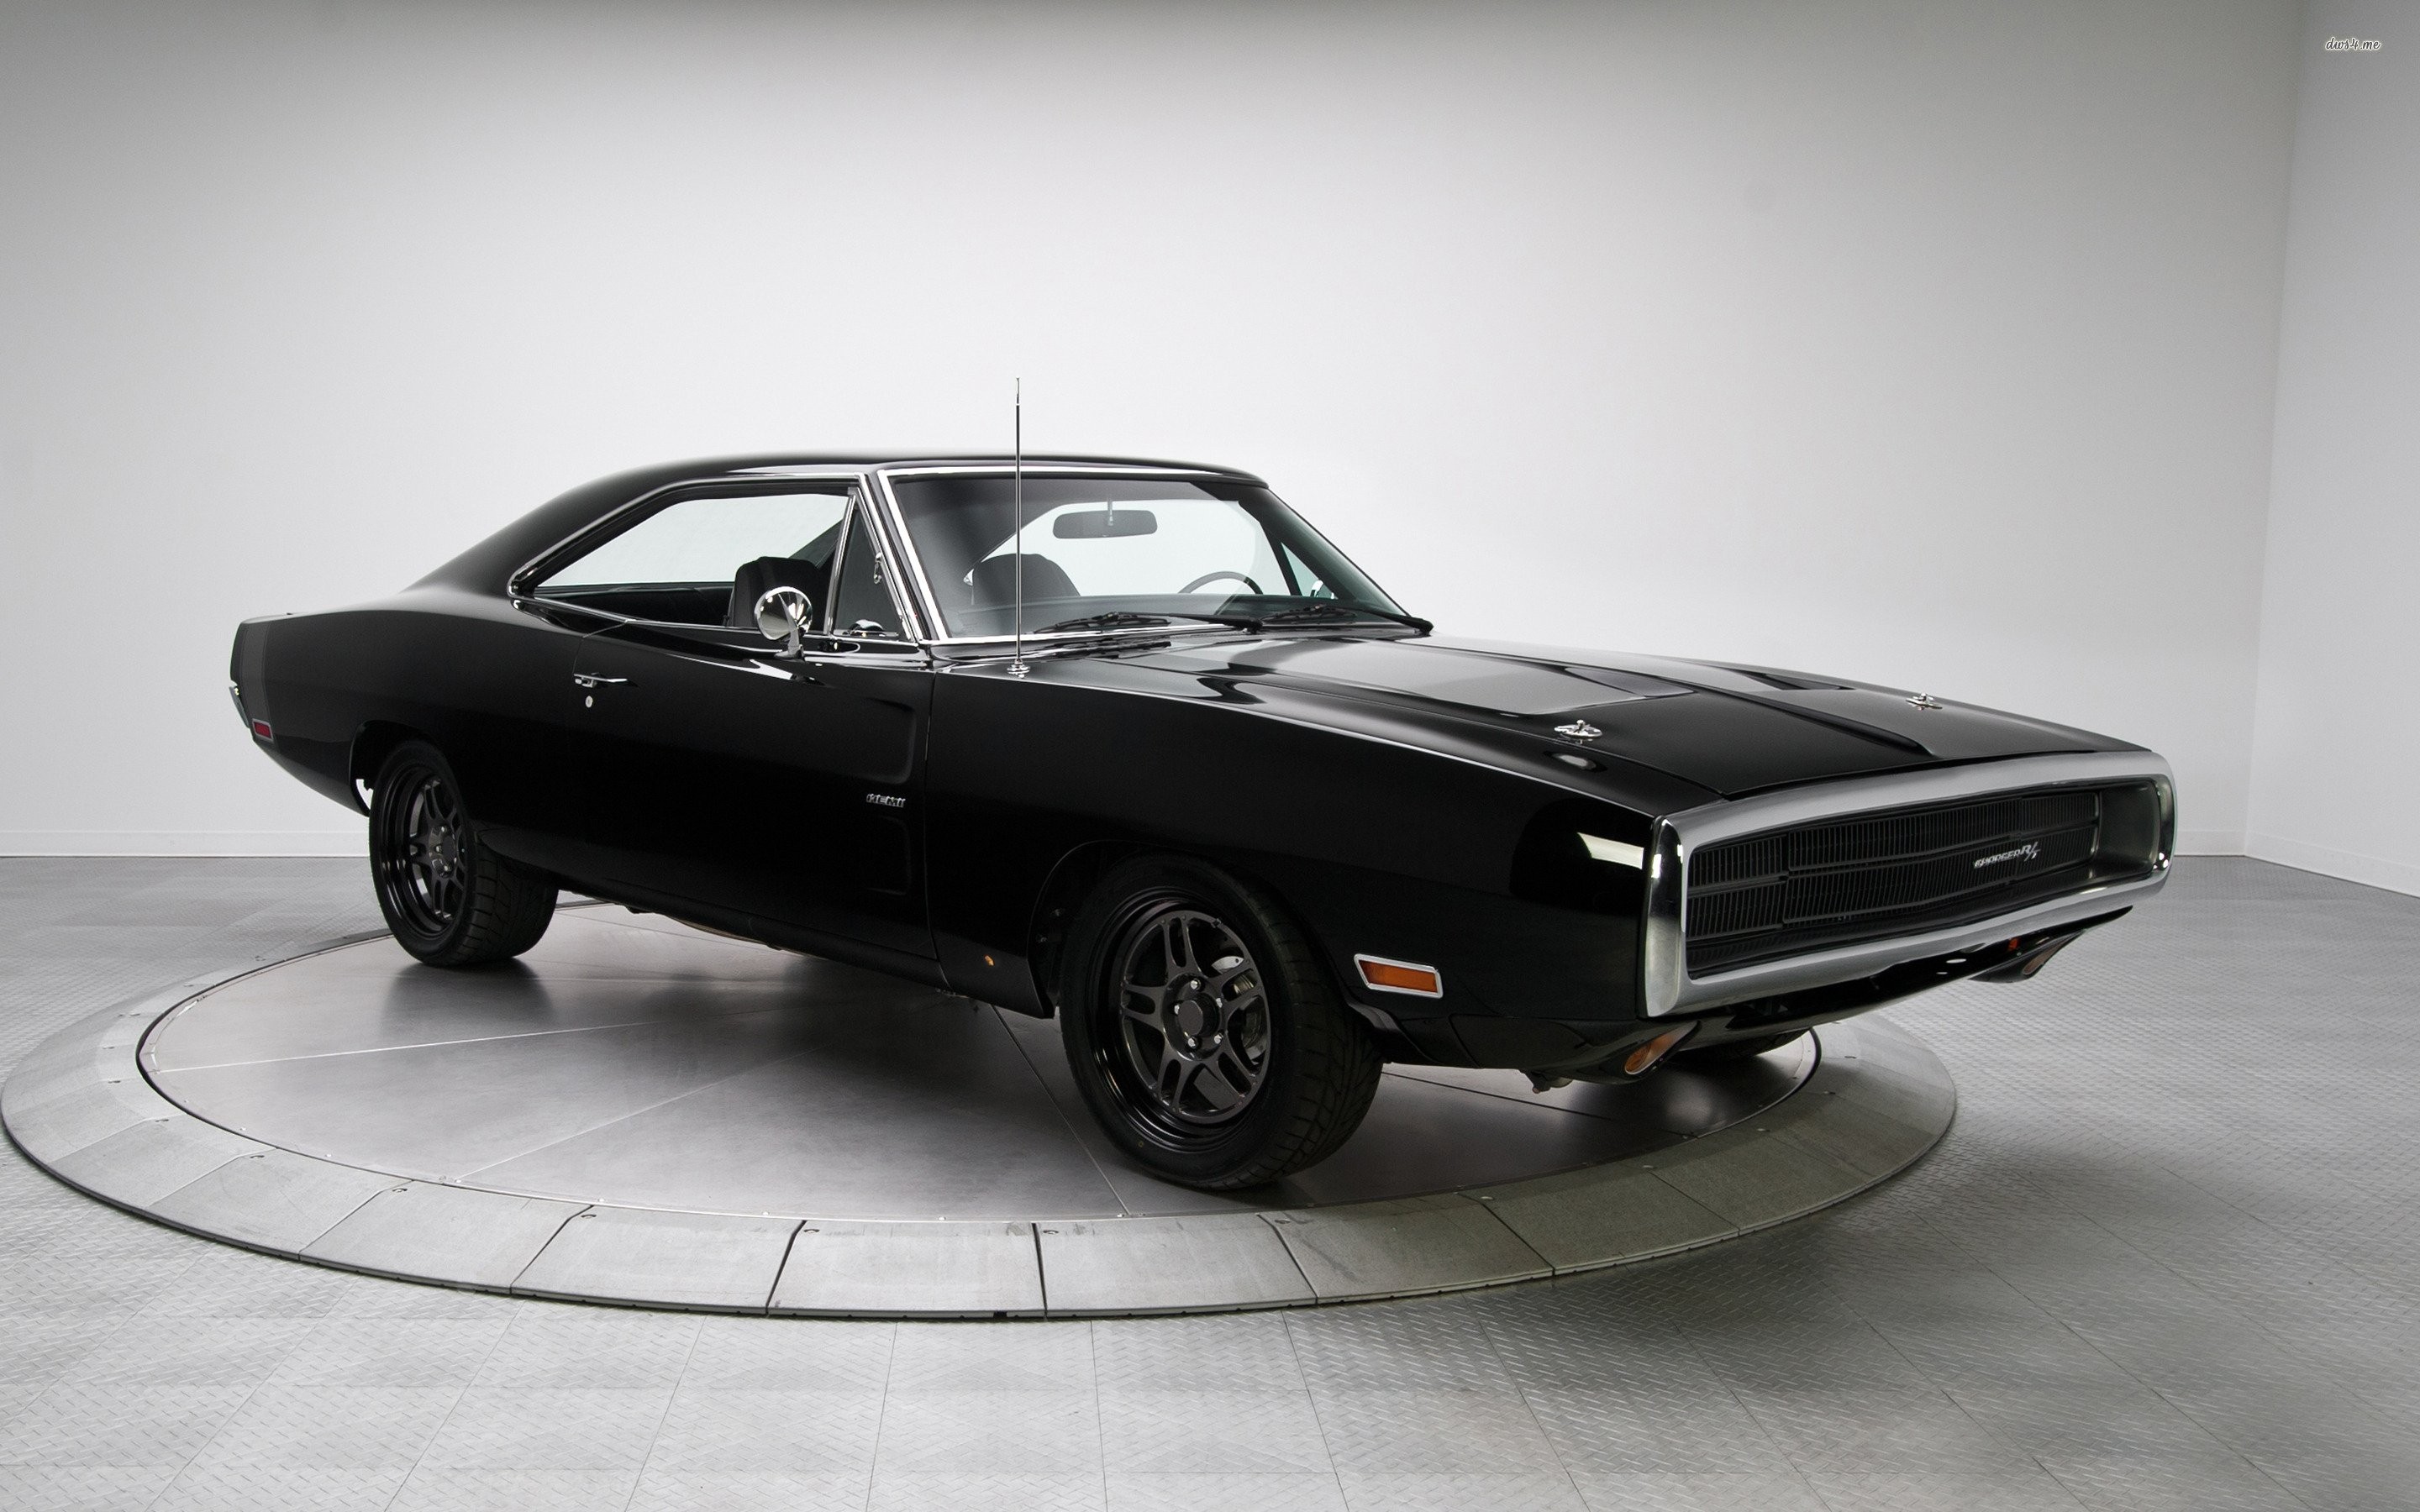 Dodge Charger R T Charger RT Black Dodge Muscle Cars American Cars Car Pop Up Headlights Black Cars 2880x1800